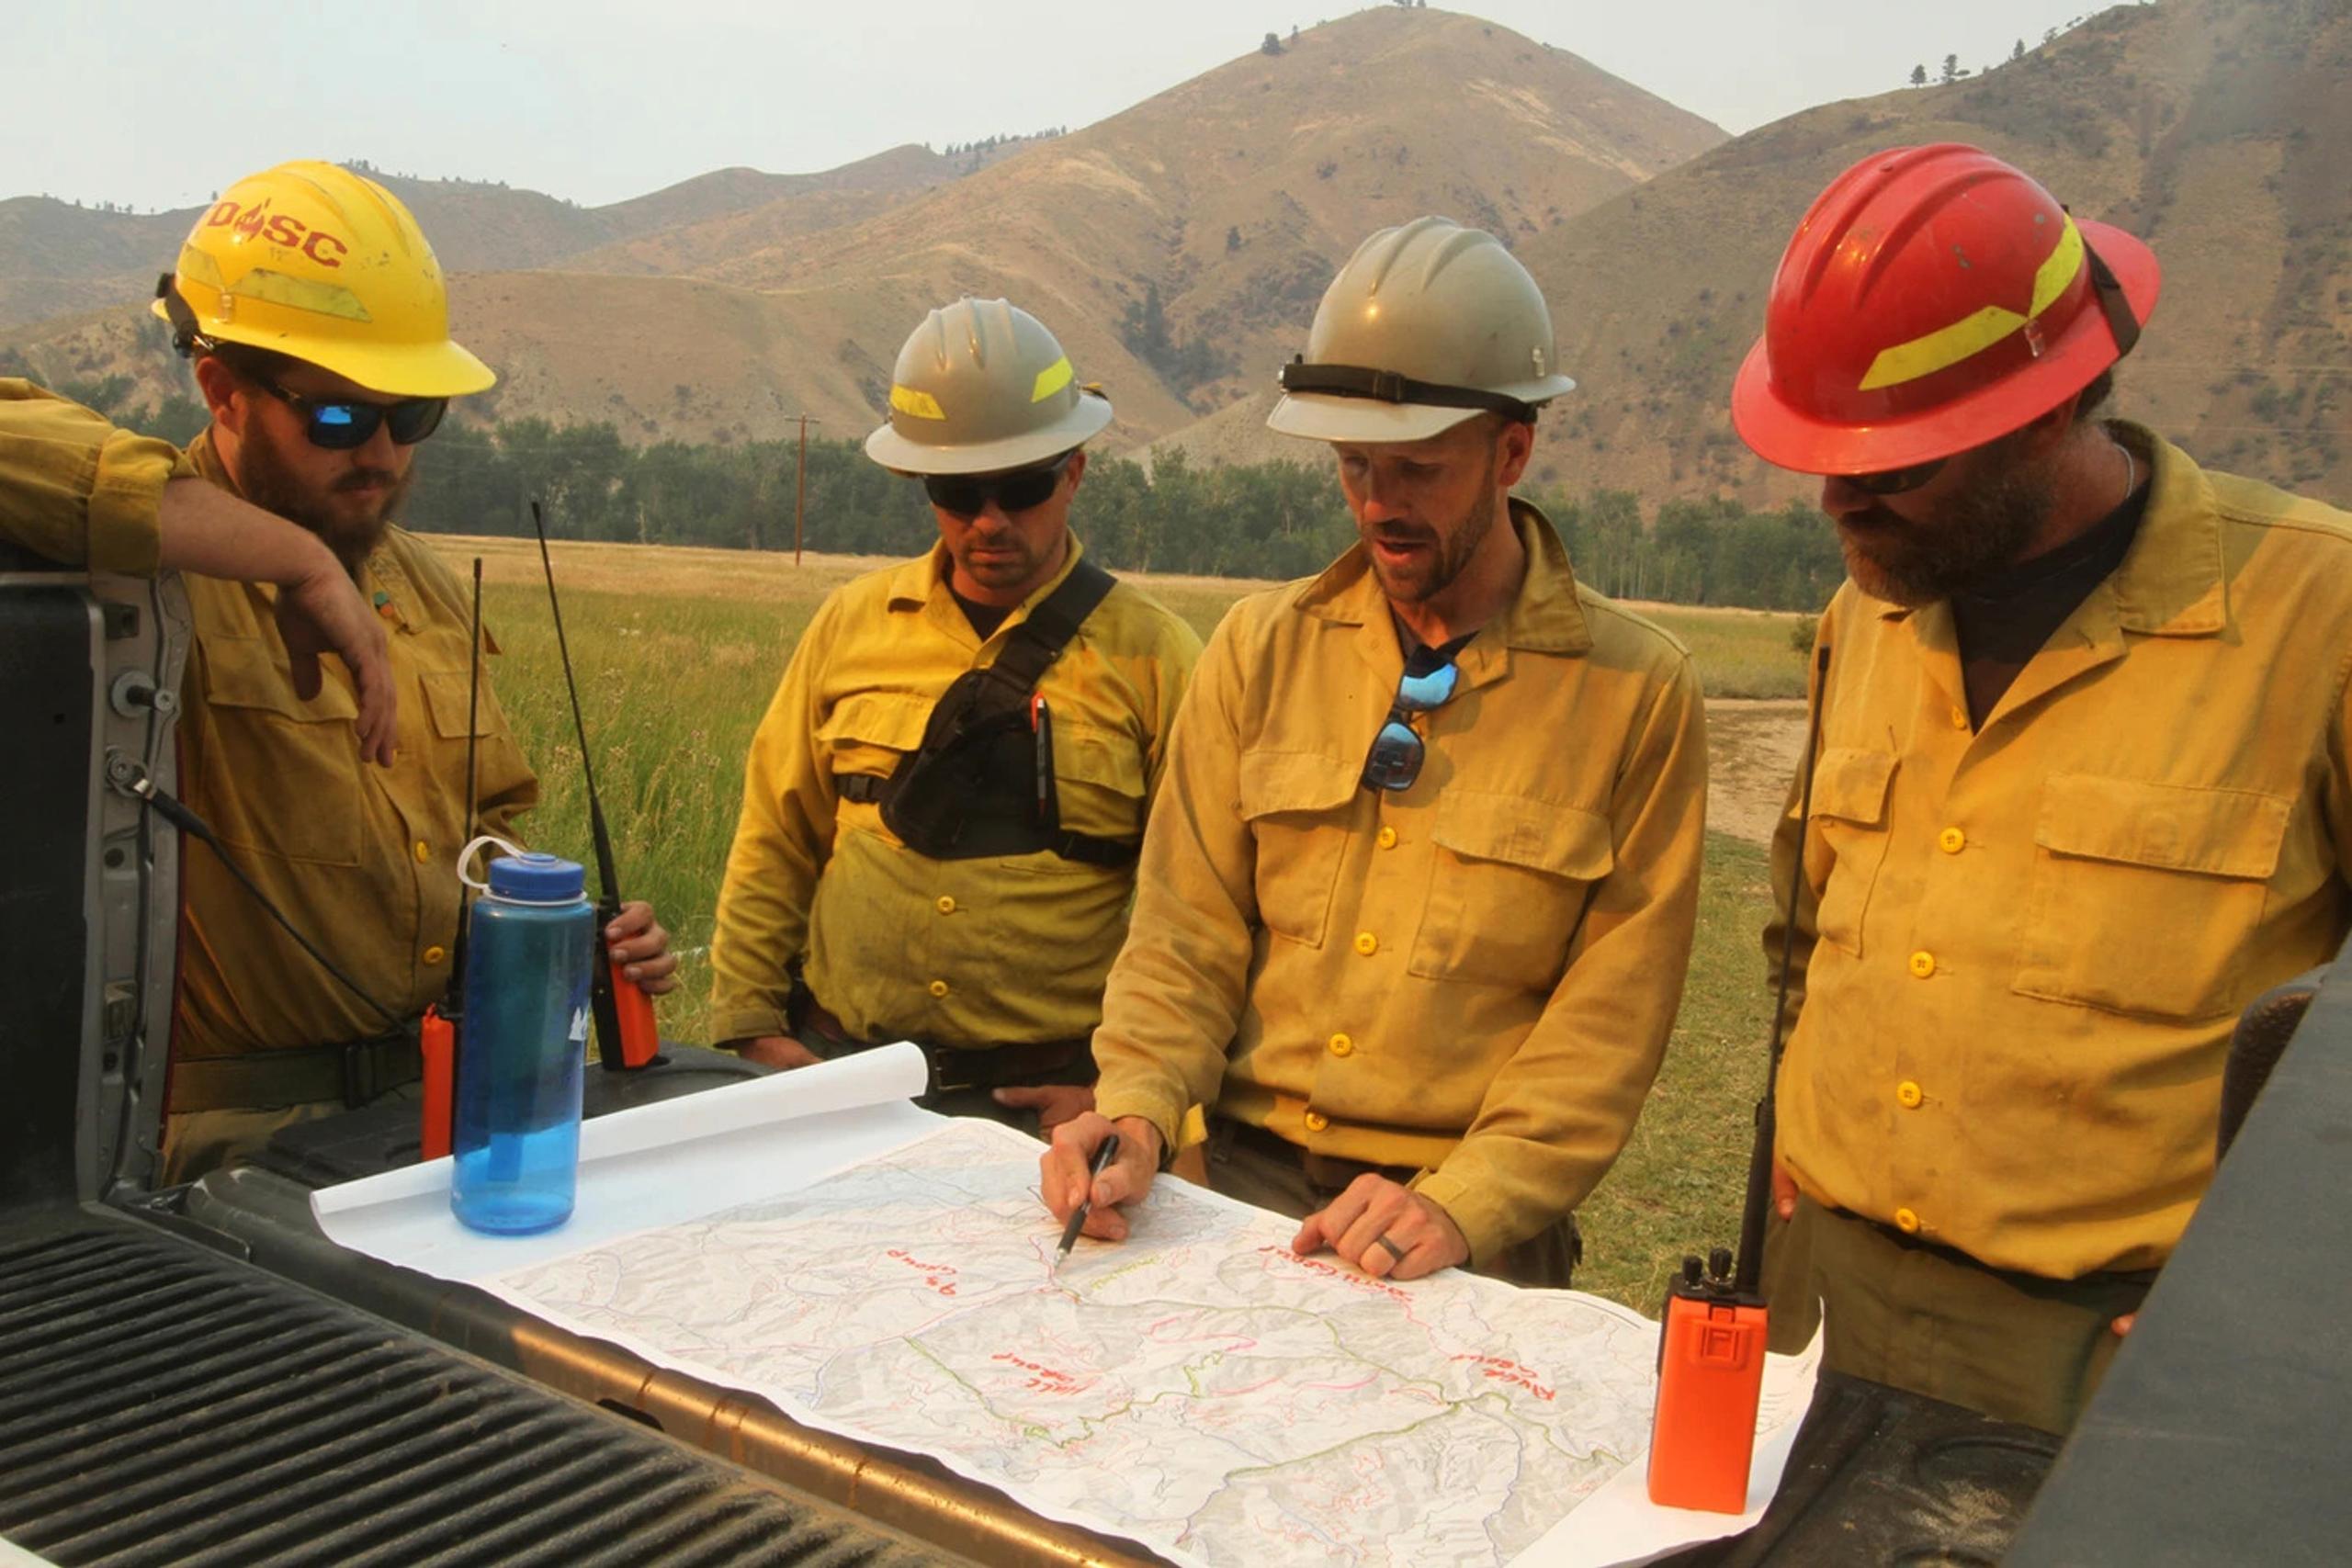 Smokejumpers analyzing map in the back of truck